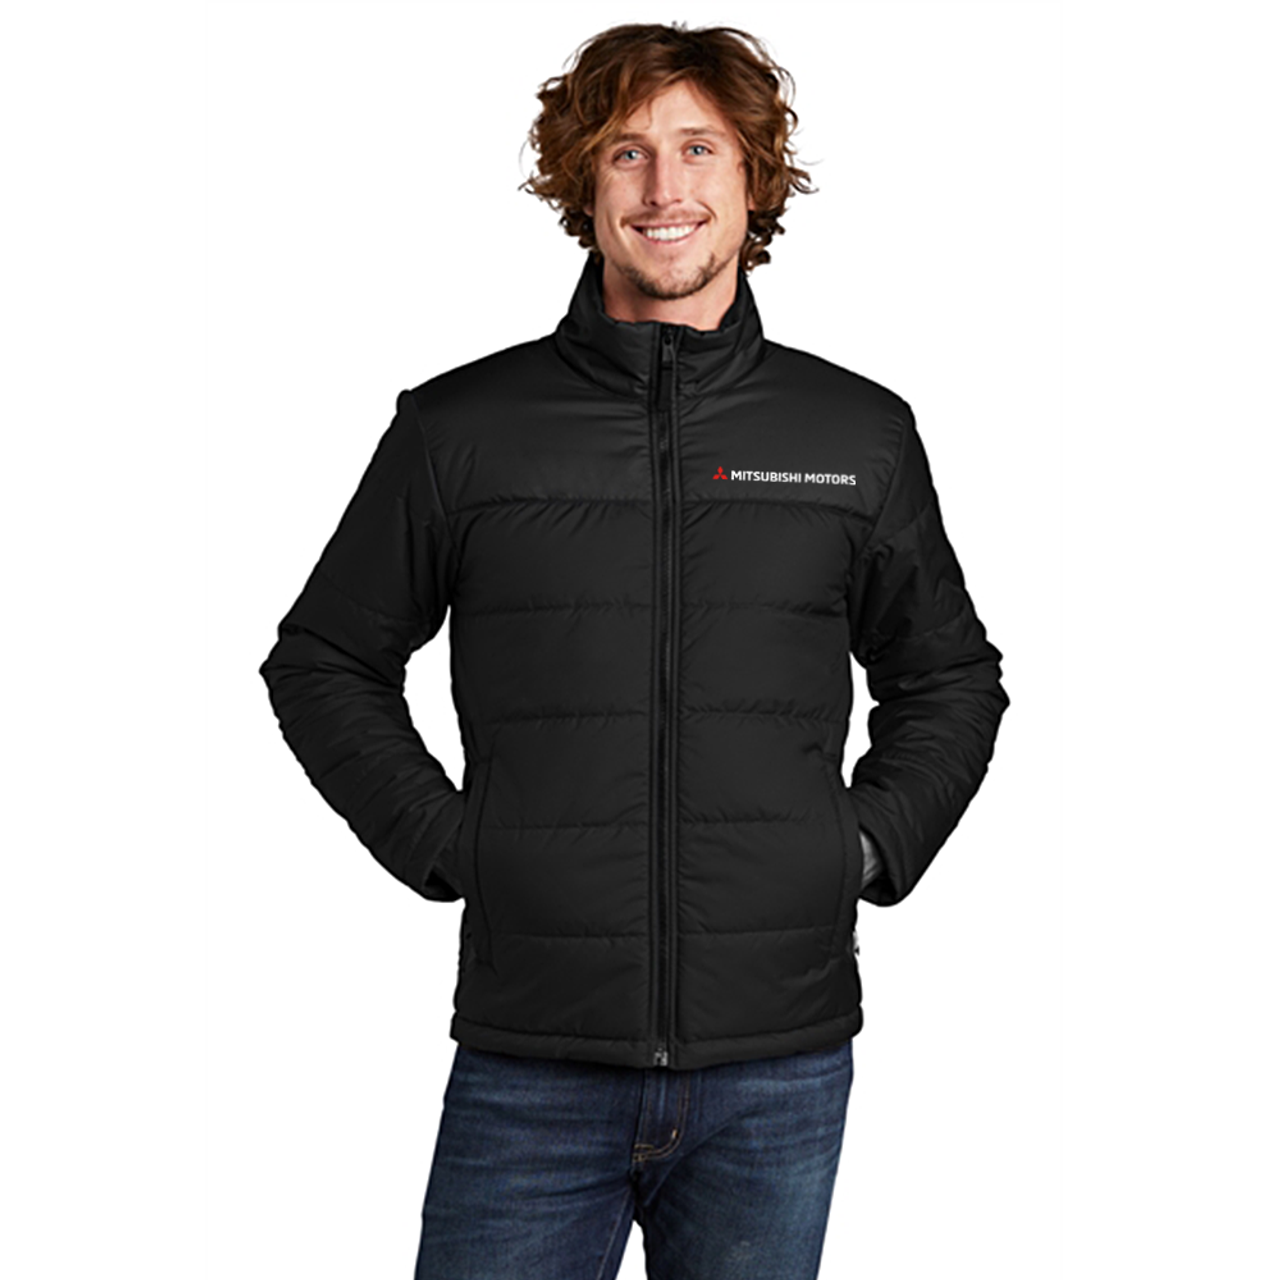 The North Face Explorer Jacket